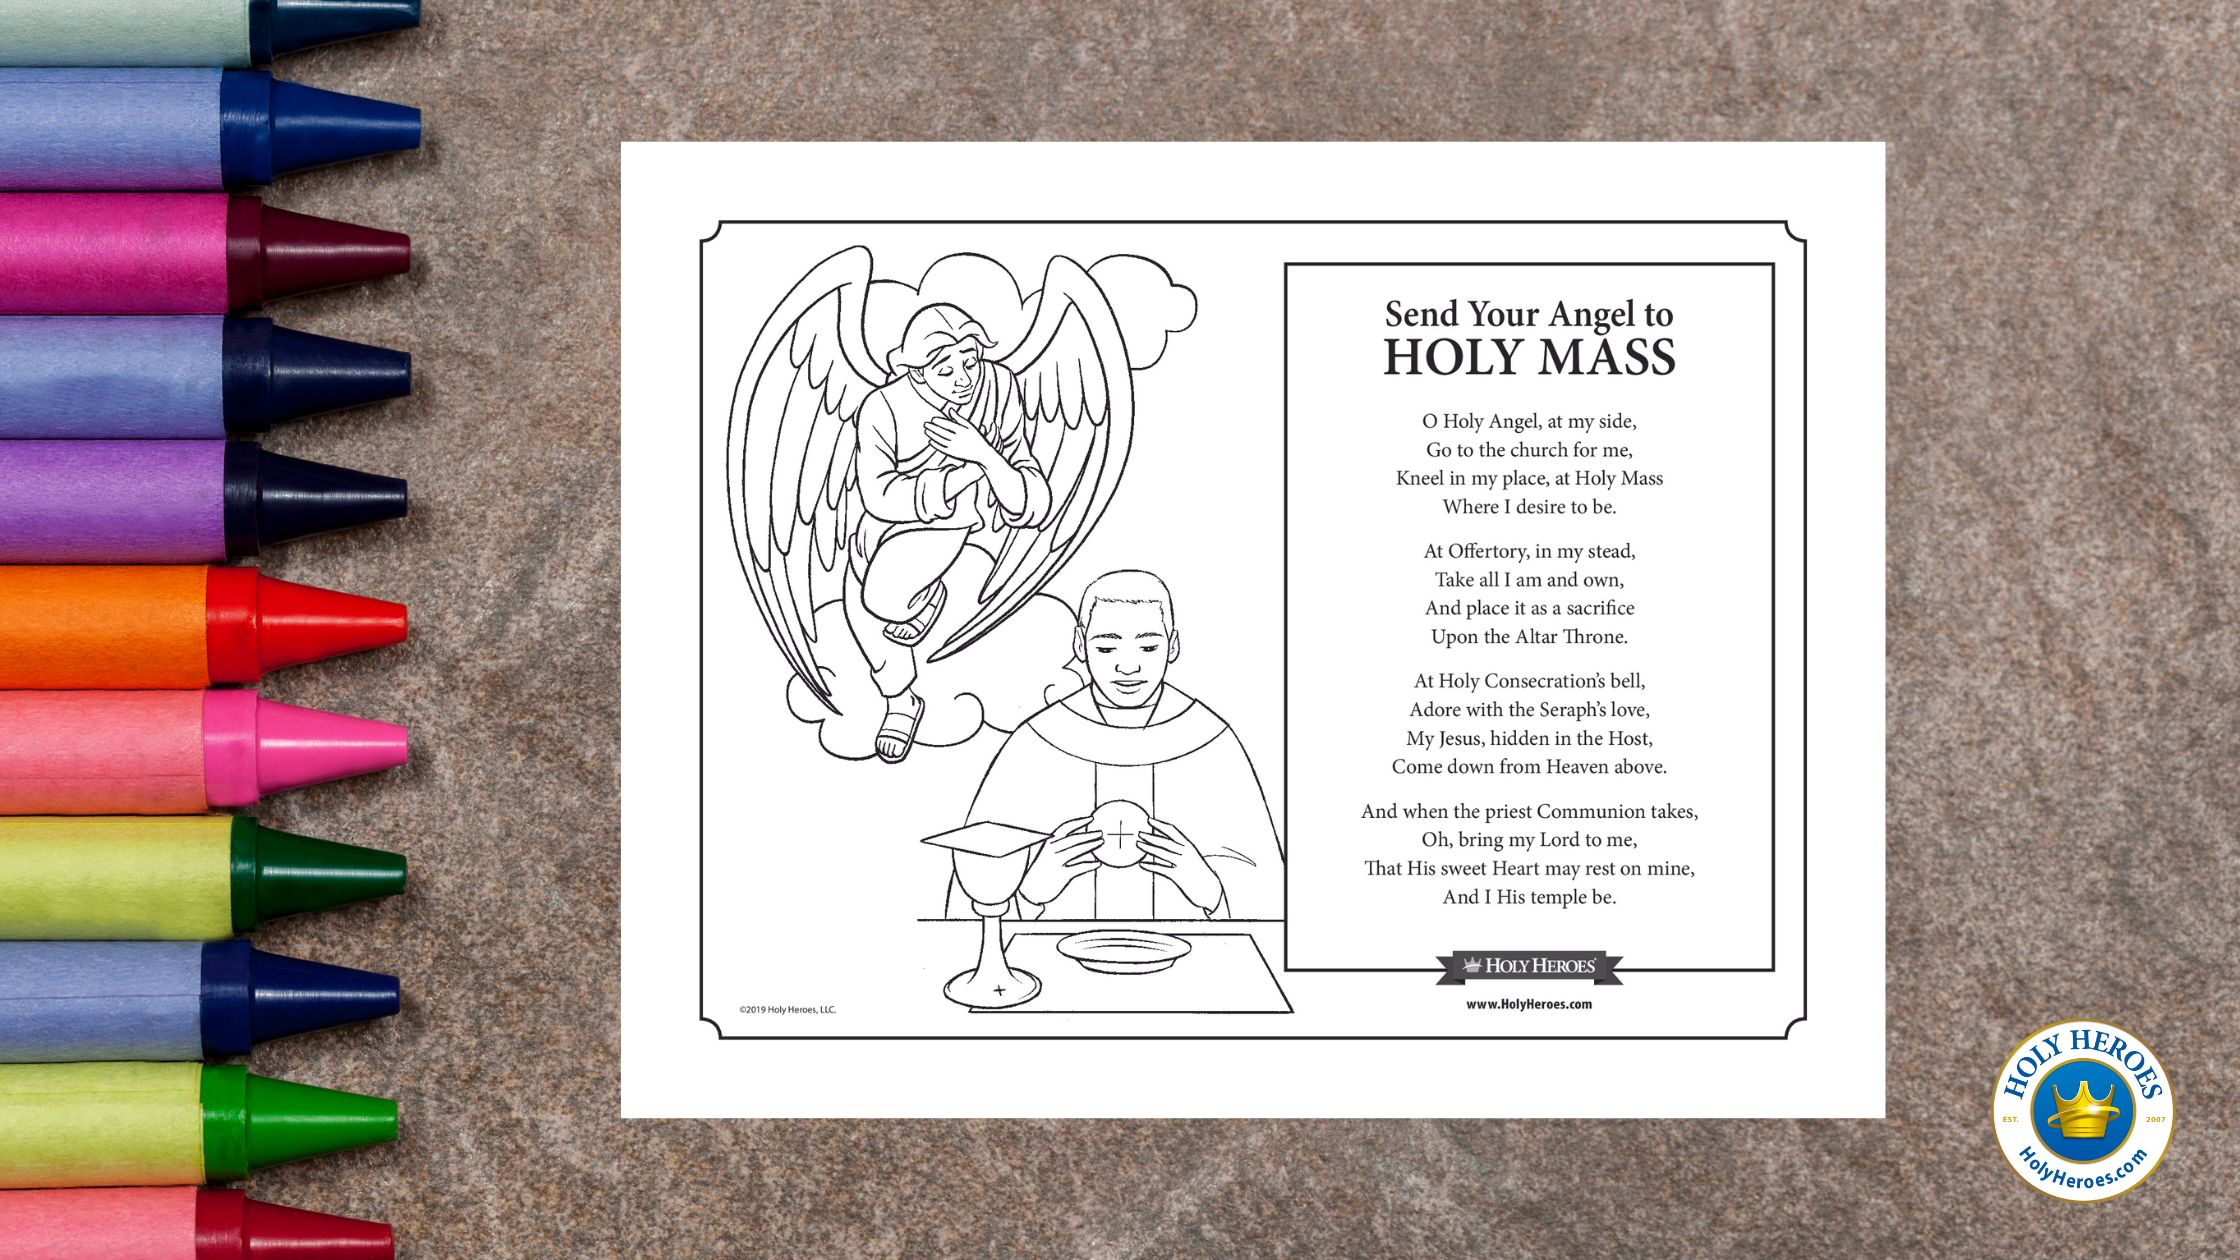 Amanda the Adventurer Coloring Pages Printable for Free Download